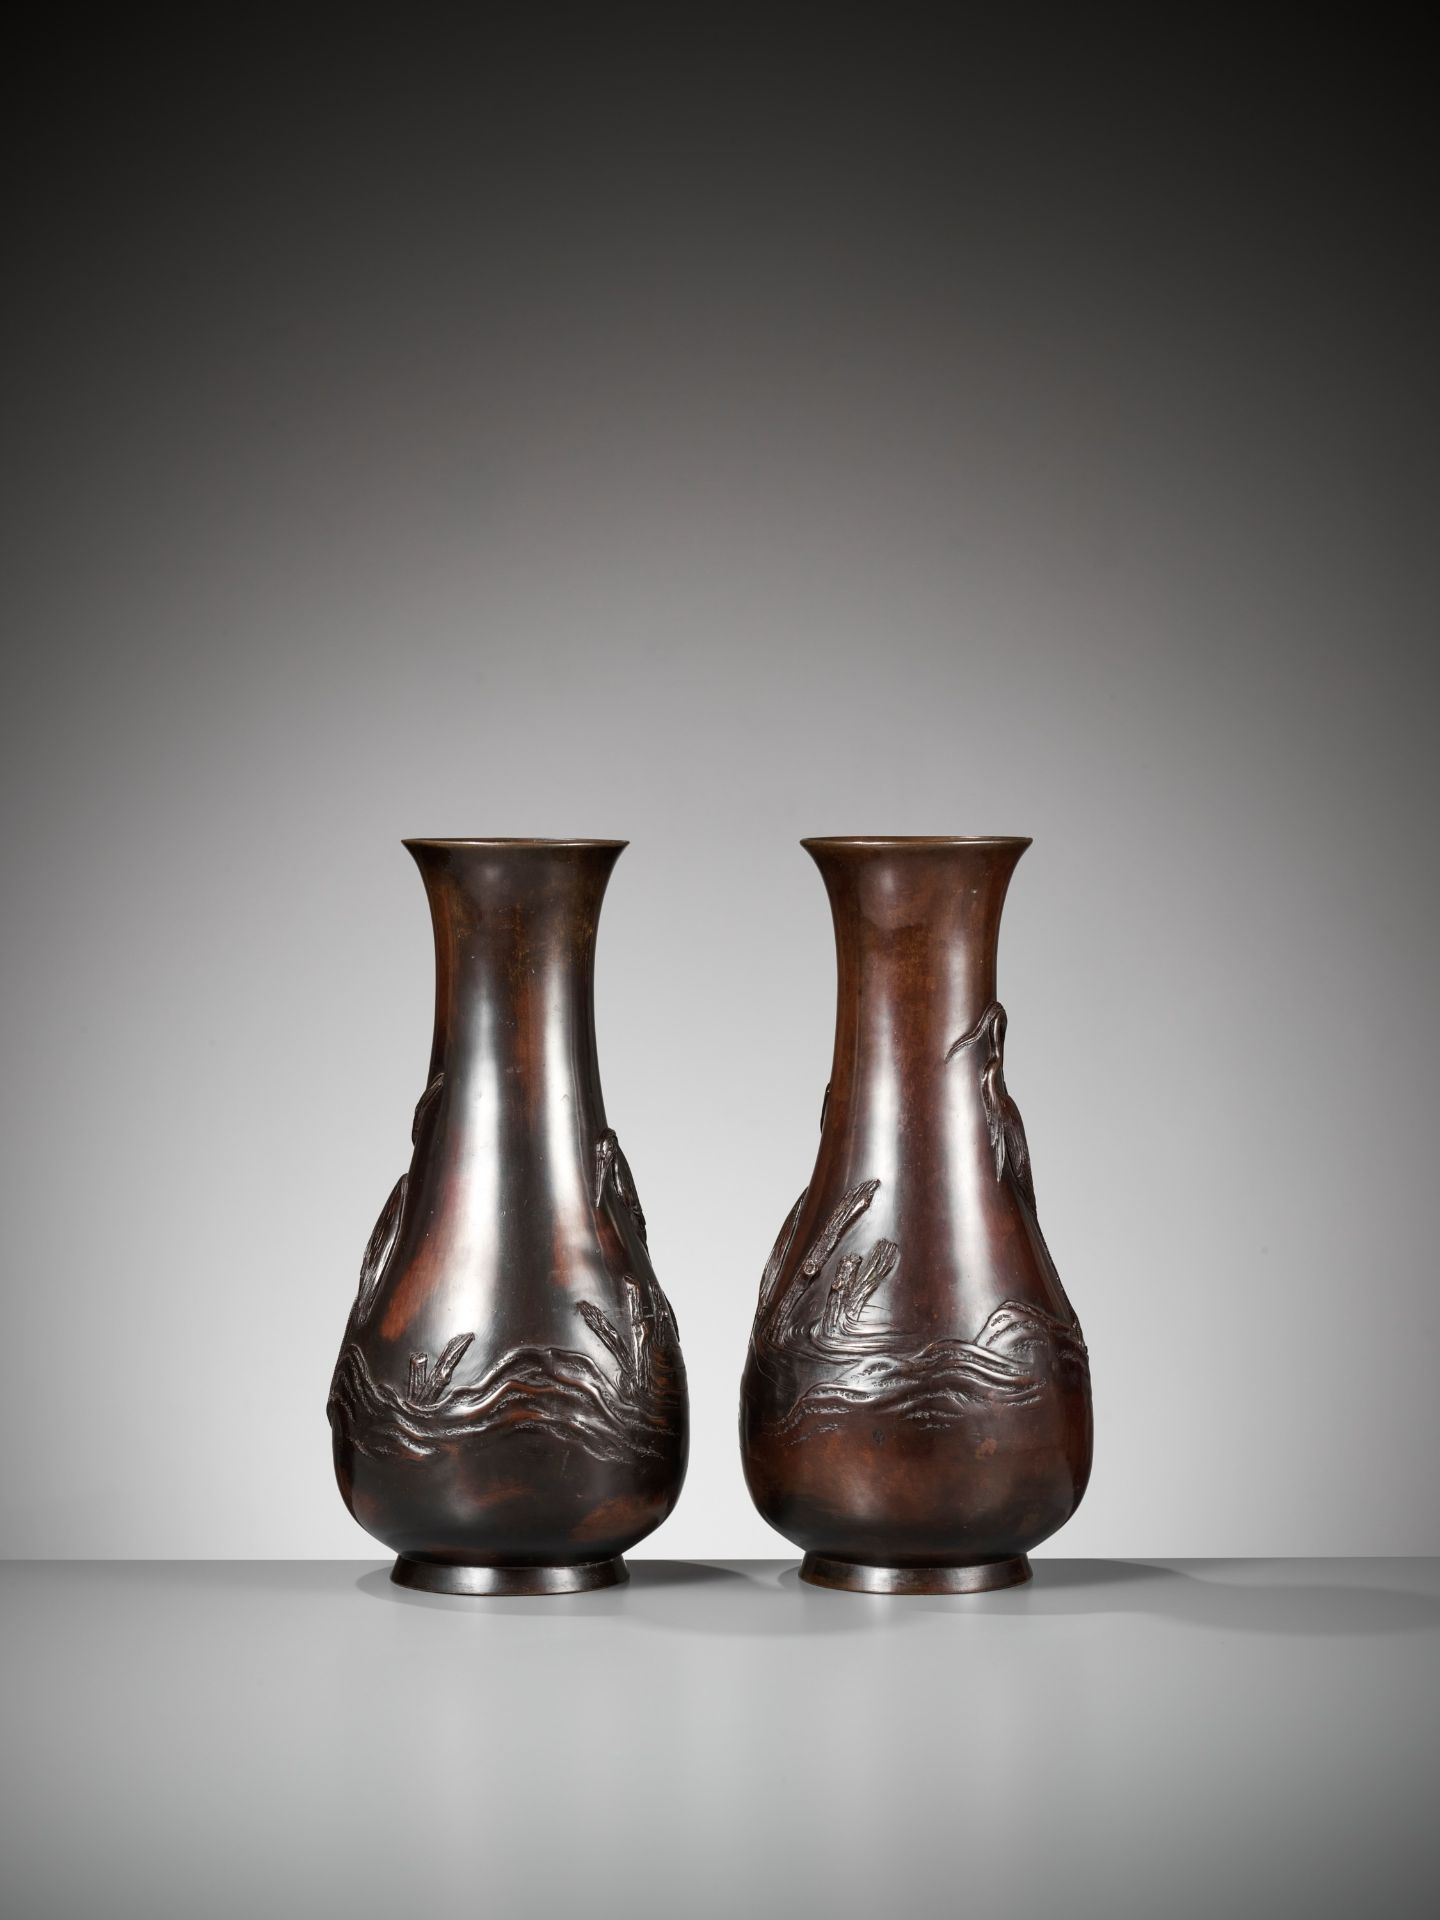 A PAIR OF BRONZE VASES DEPICTING EGRETS - Image 6 of 8